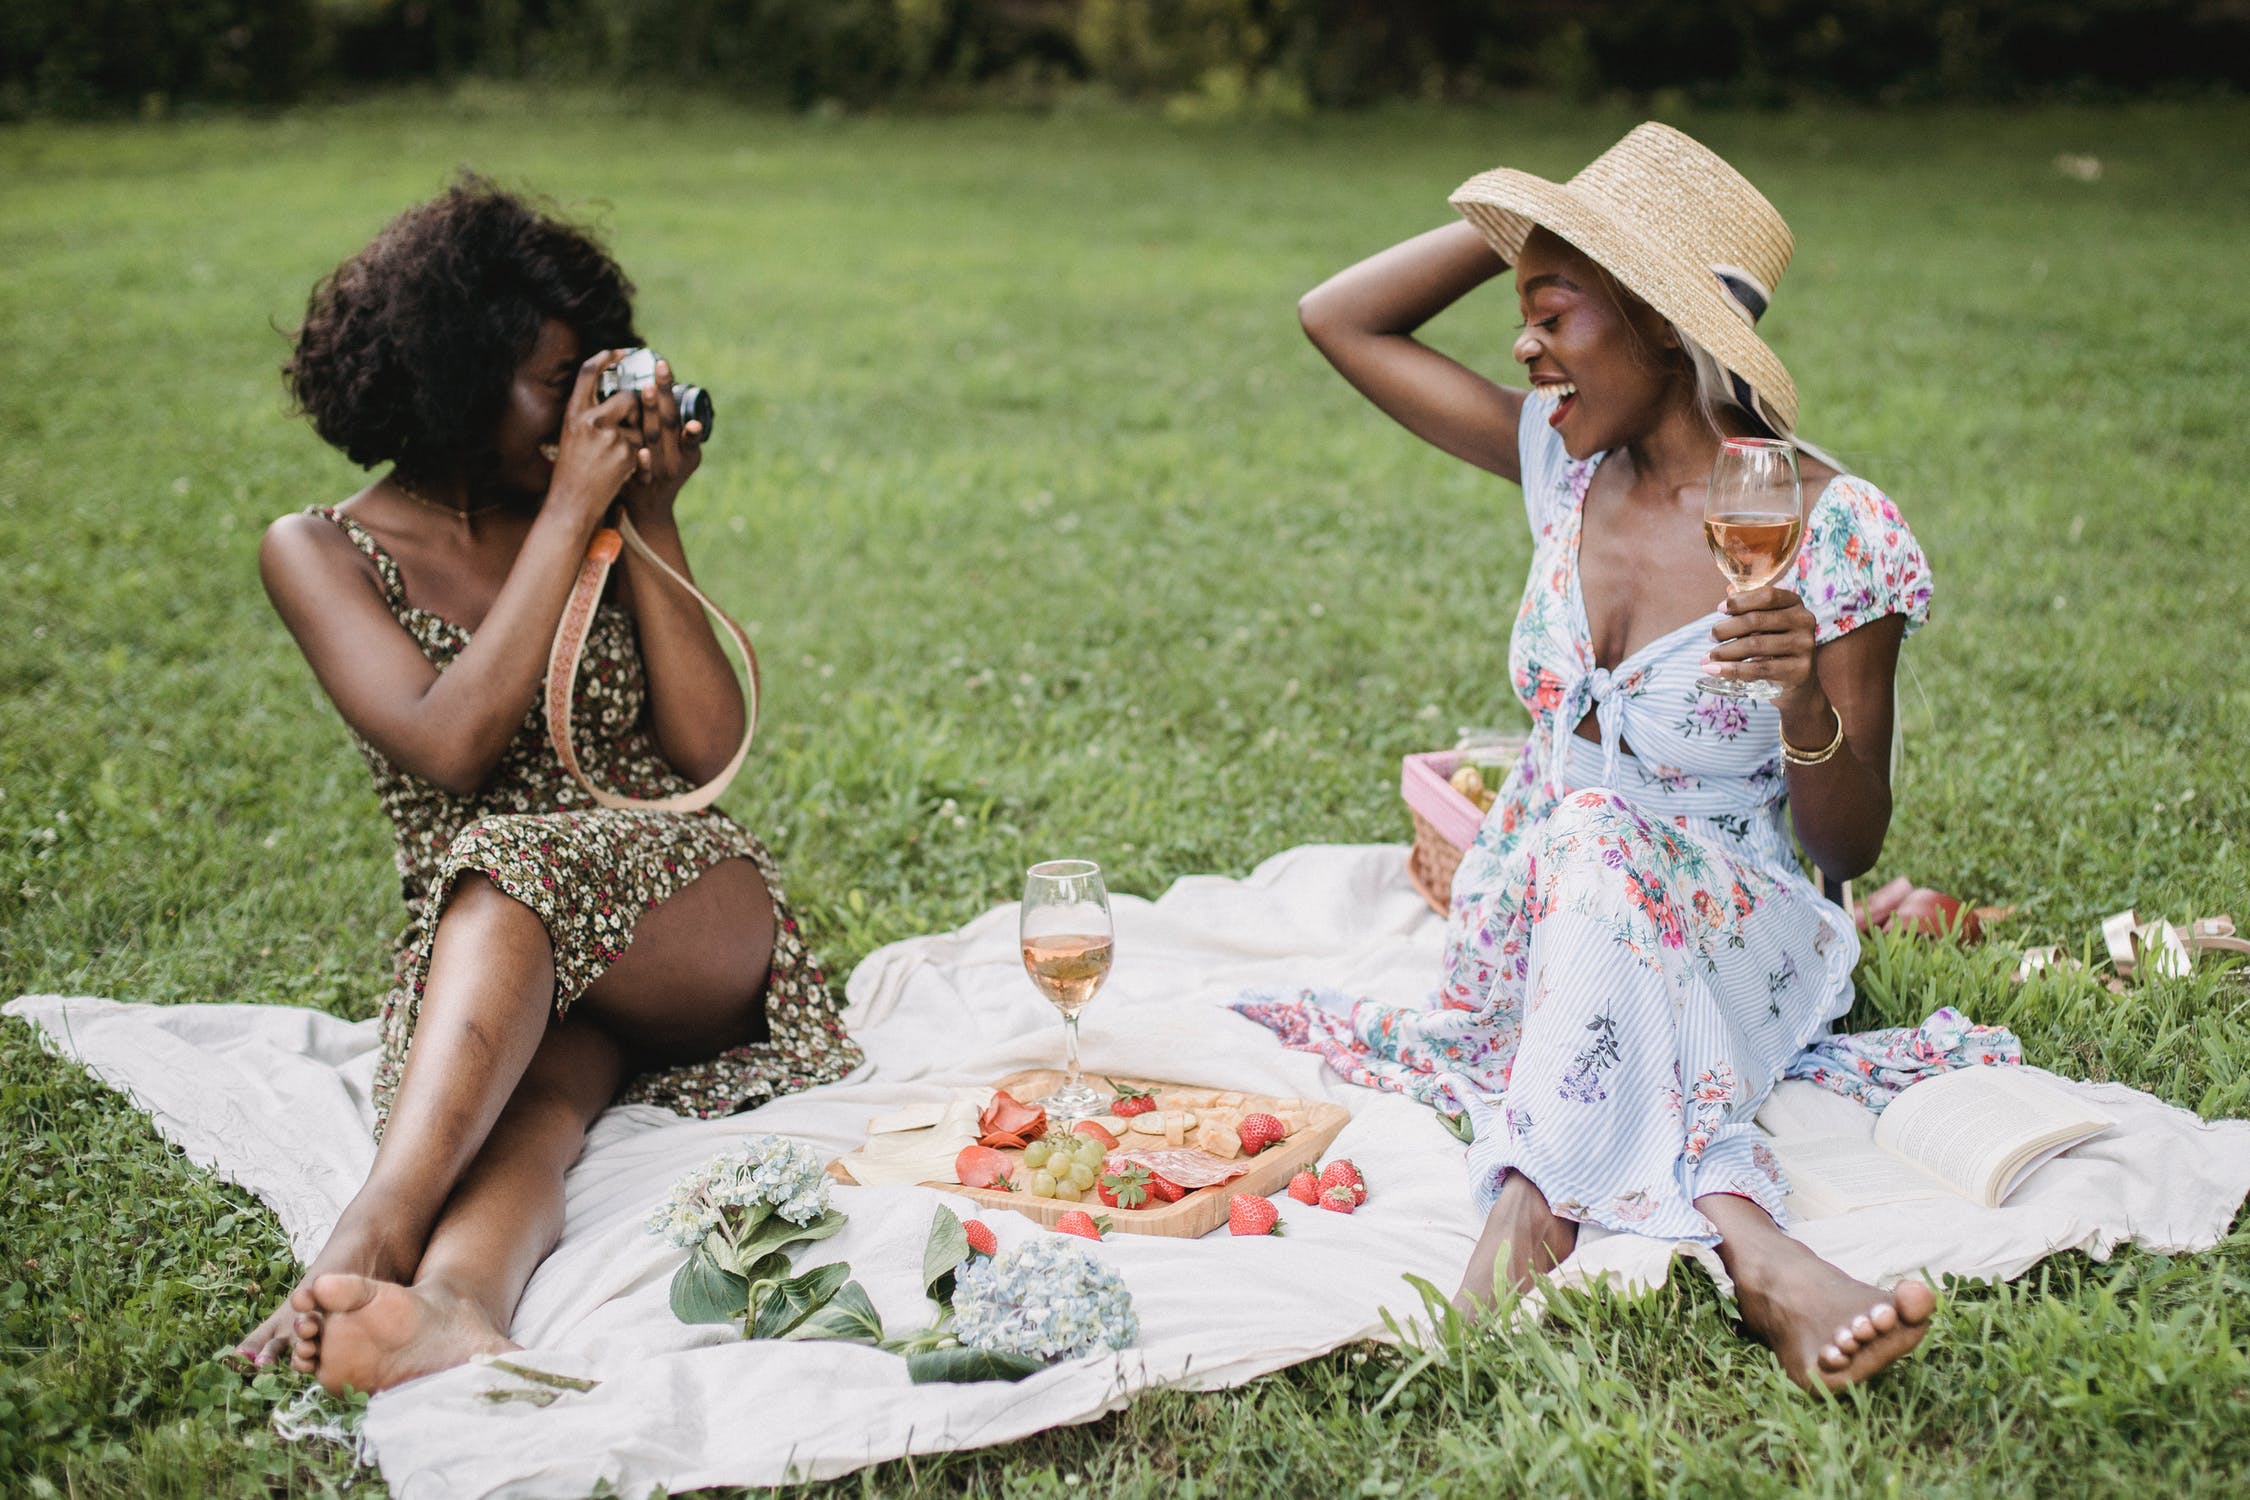 women taking pictures at picnic